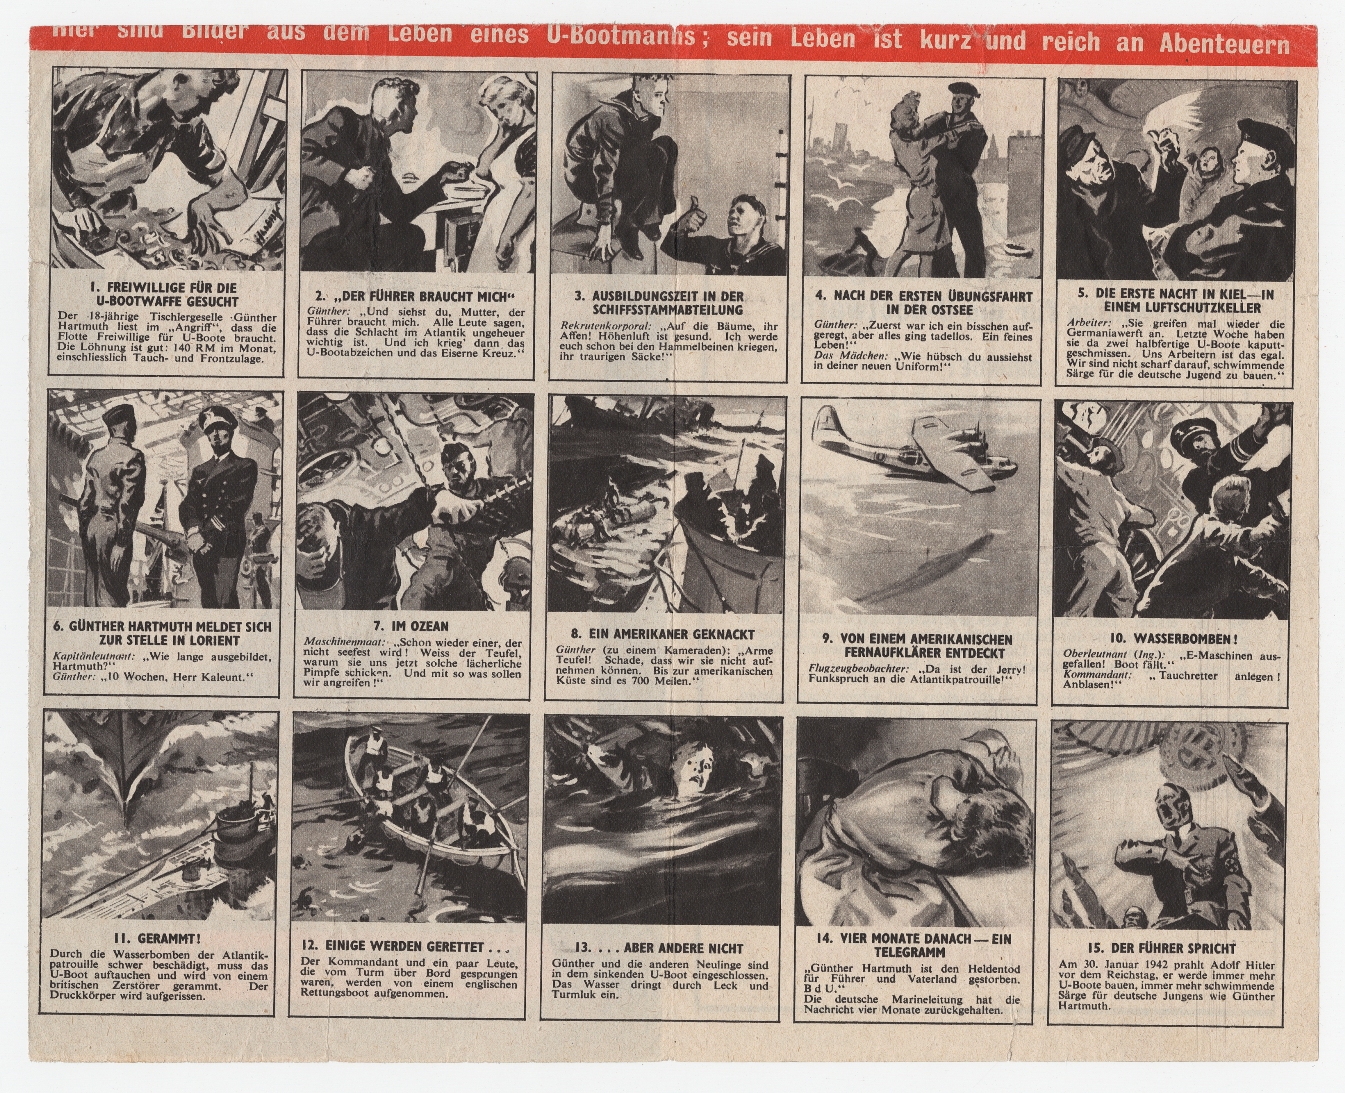 "The Life of a Submariner." Dropped from 10-11 April to 2-3 September 1942 (WWII Propaganda Collection 0360).